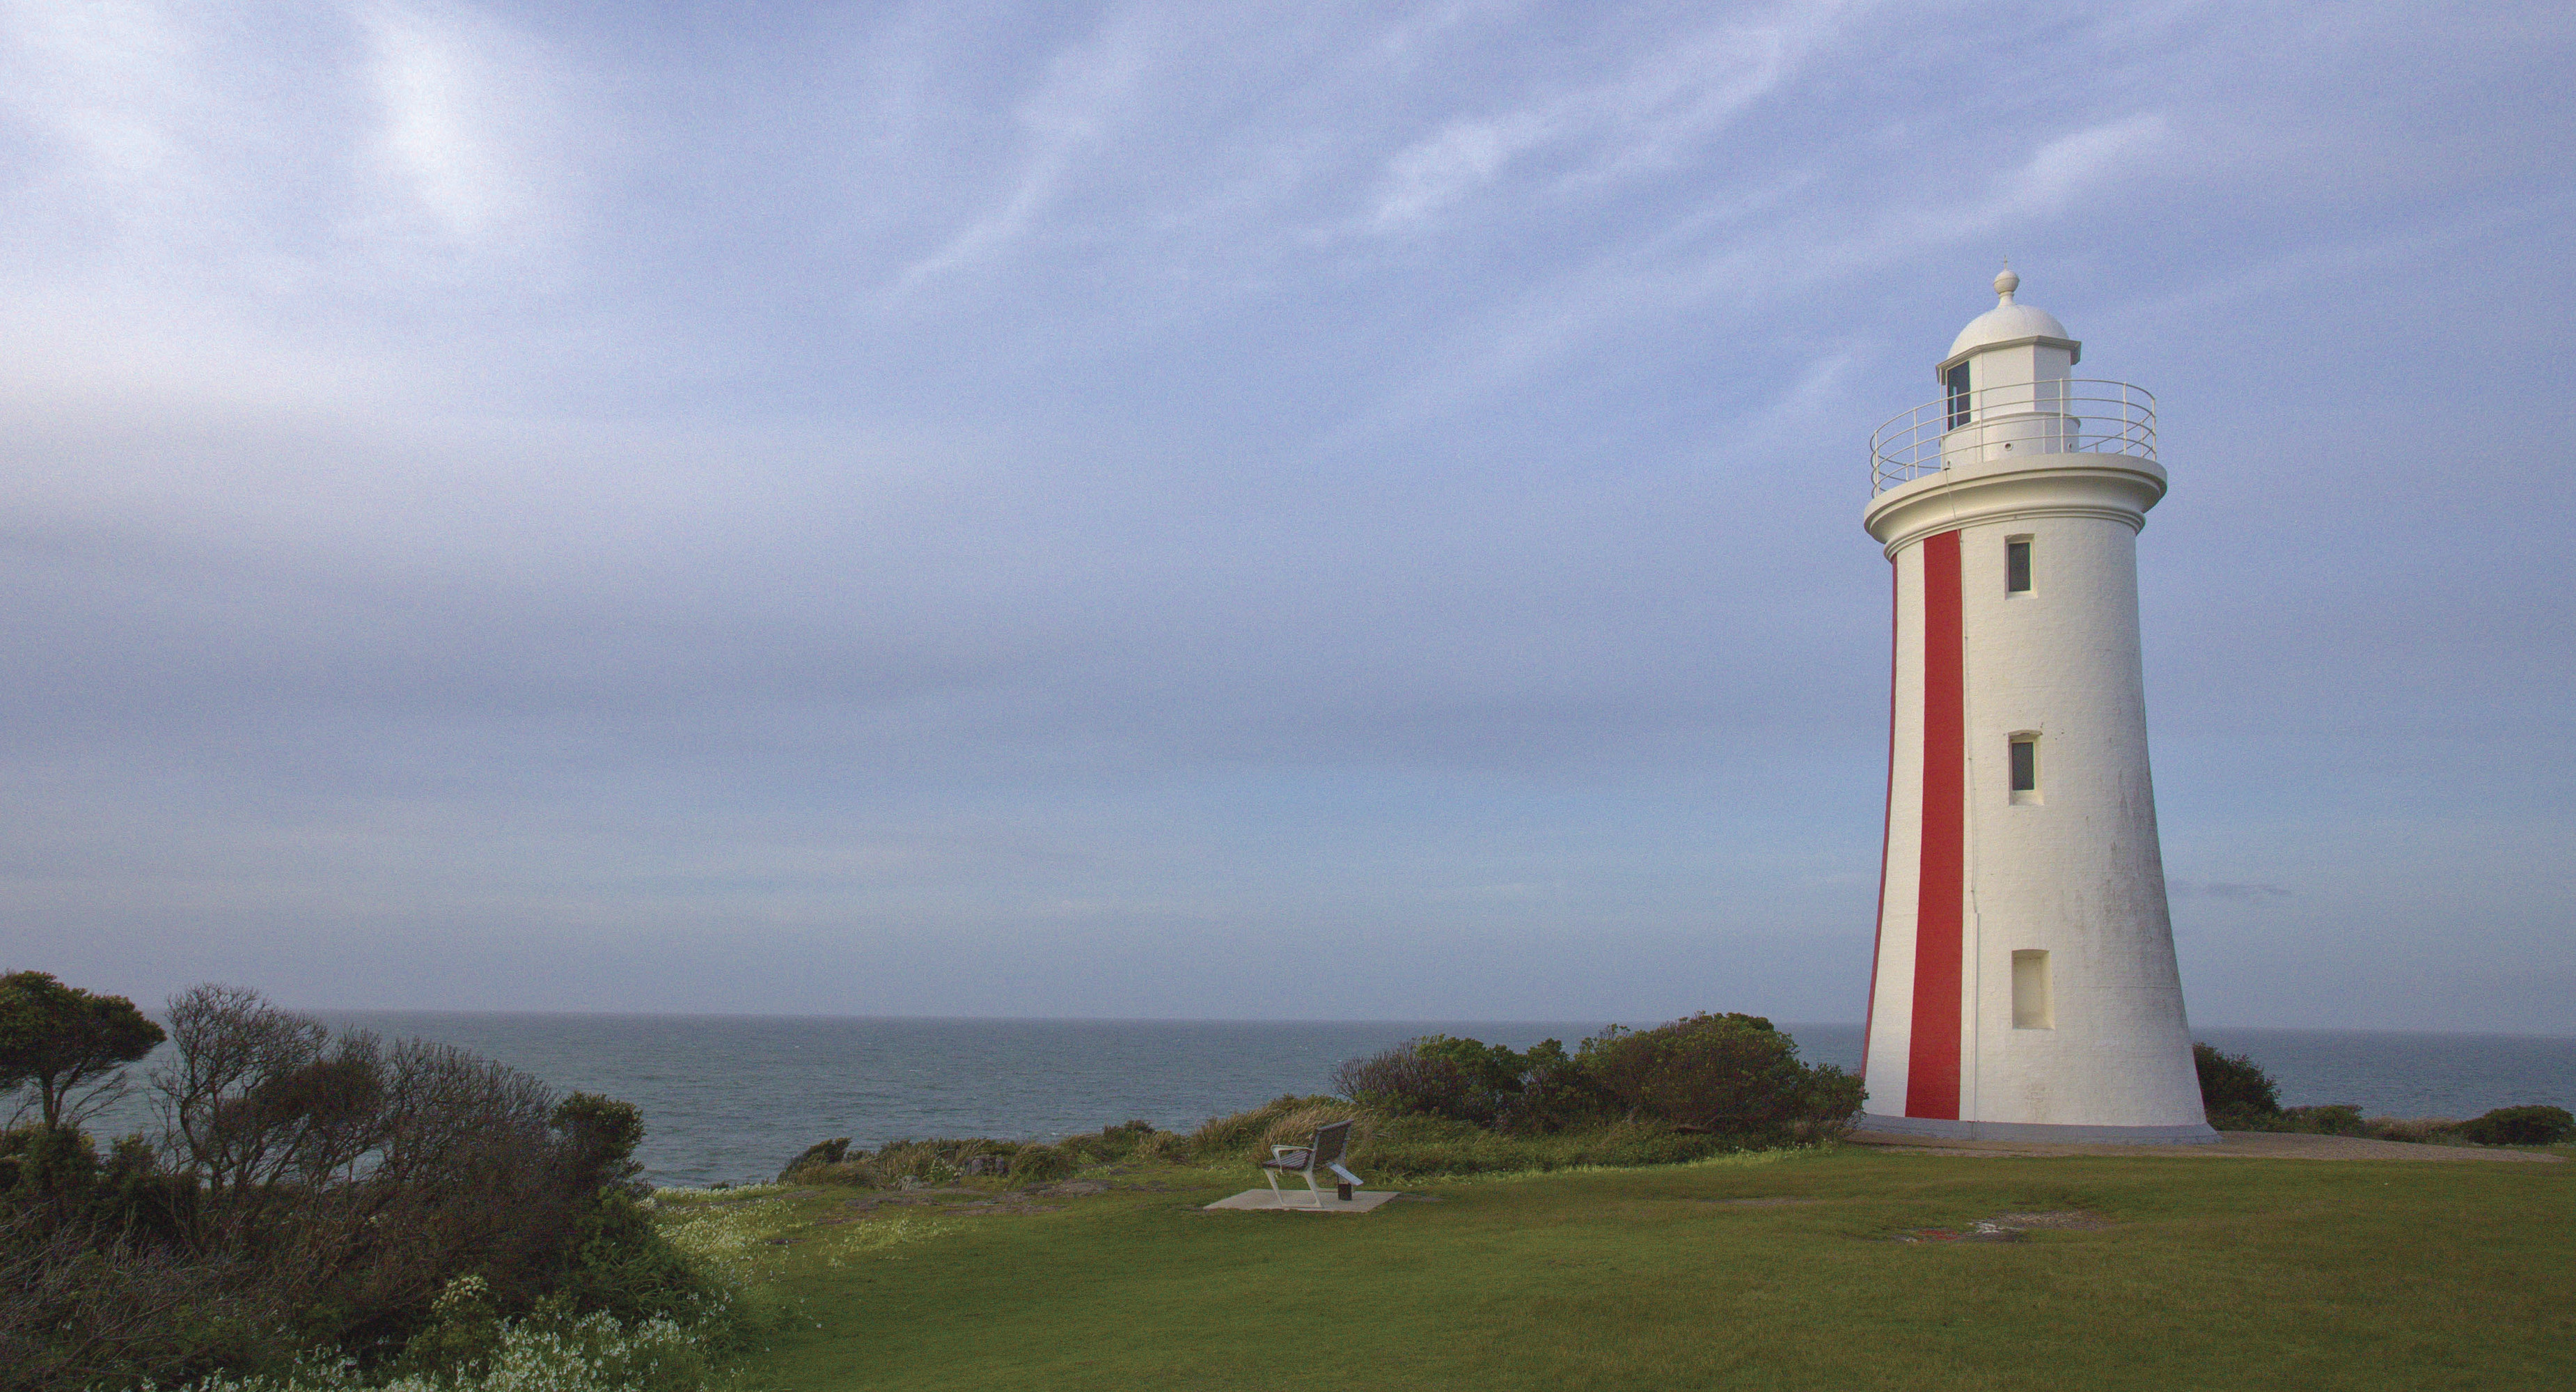 Image of Mersey Bluff Lighthouse that sits on a lush, green hill by the coastline.